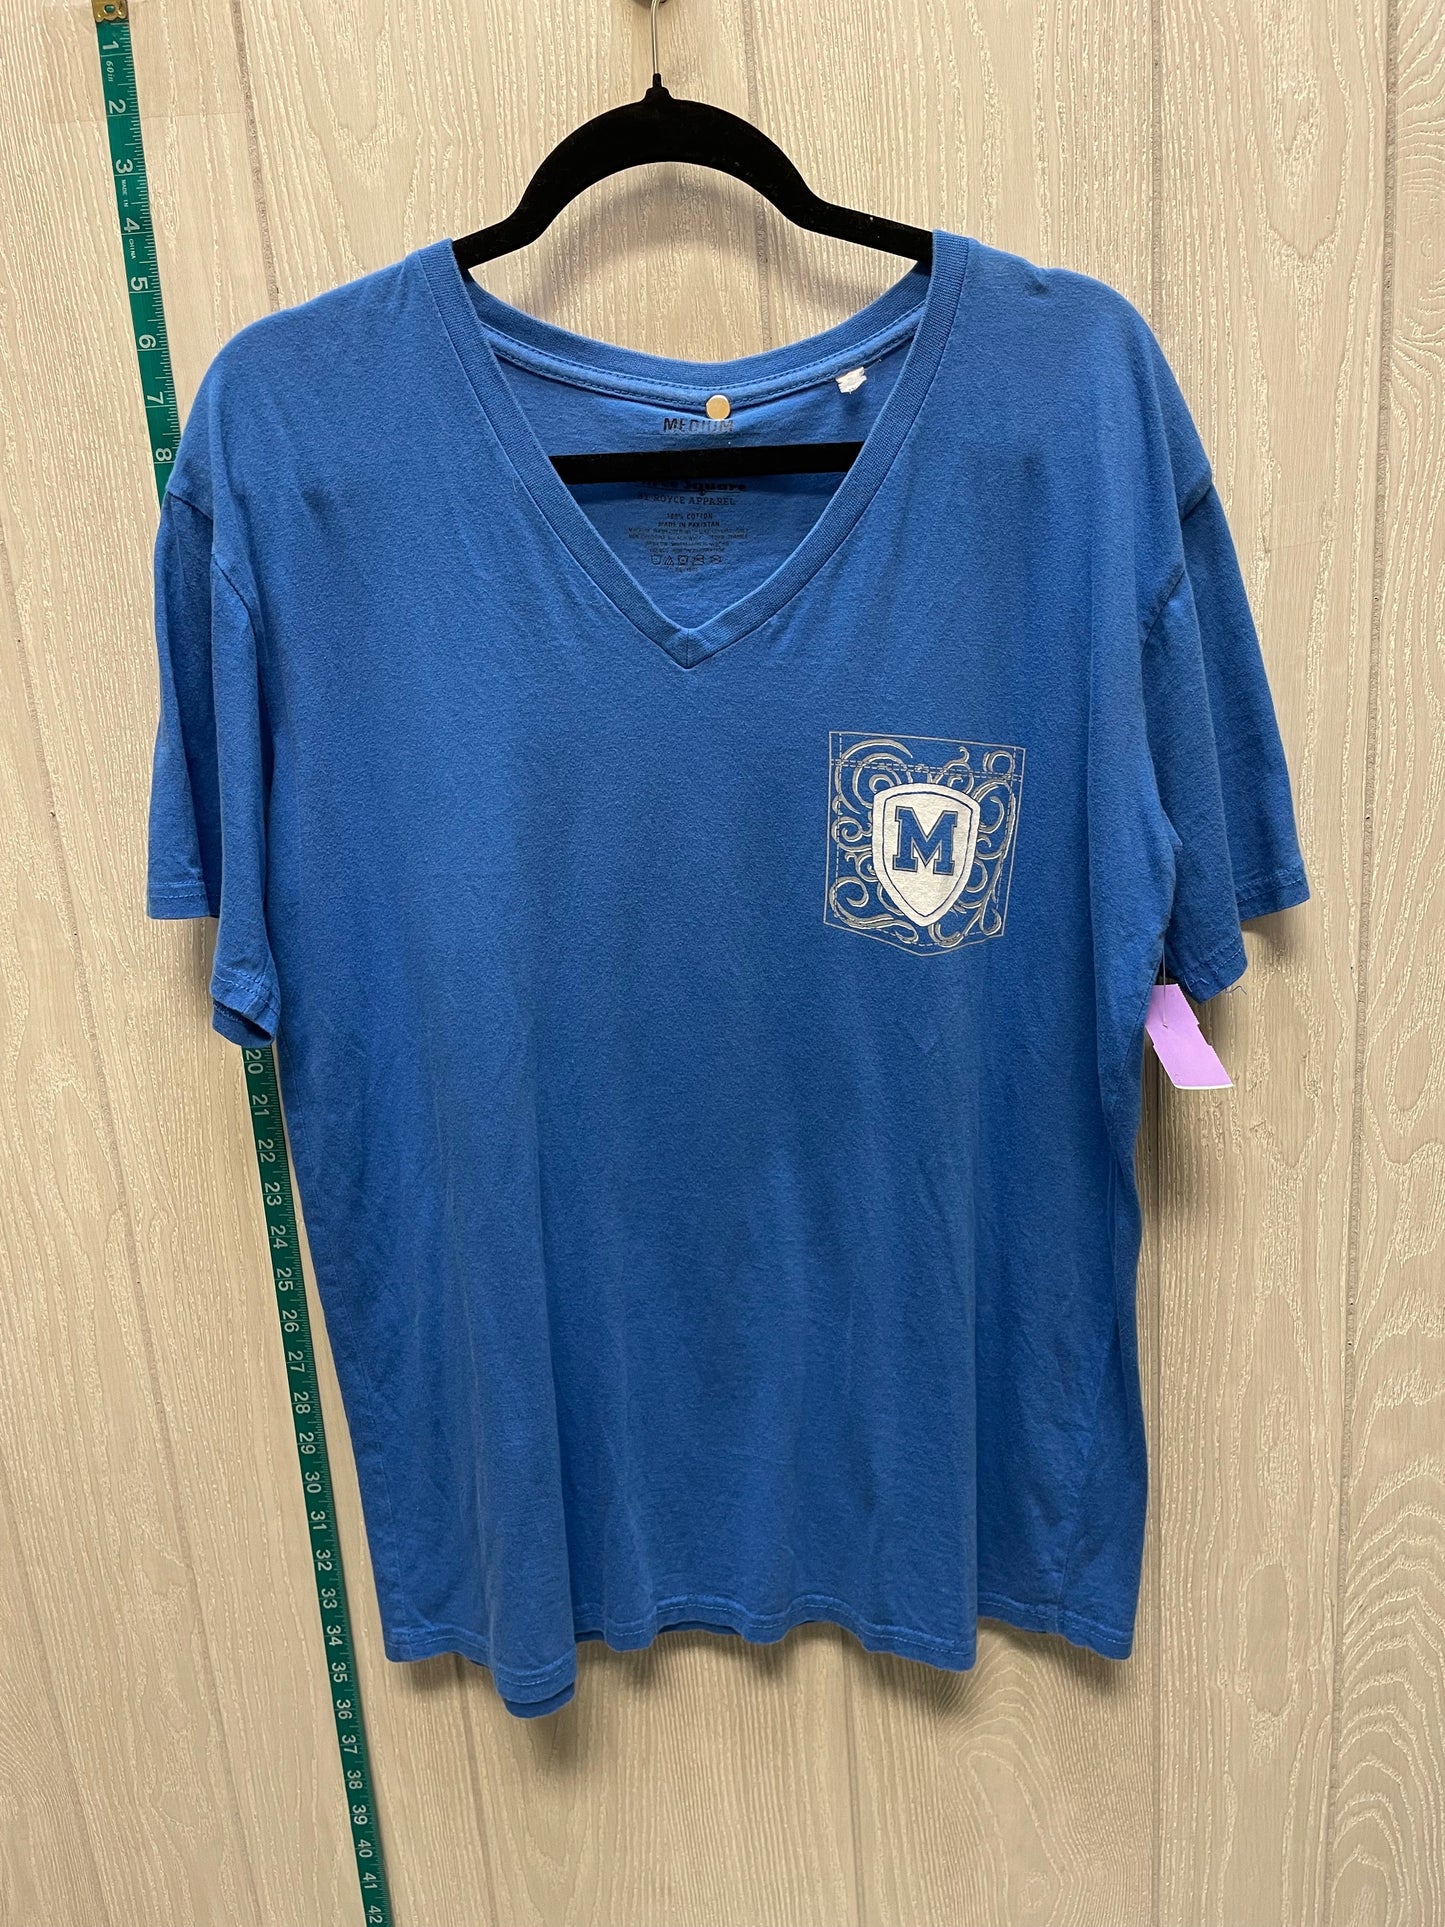 Blue Top Short Sleeve Clothes Mentor, Size M